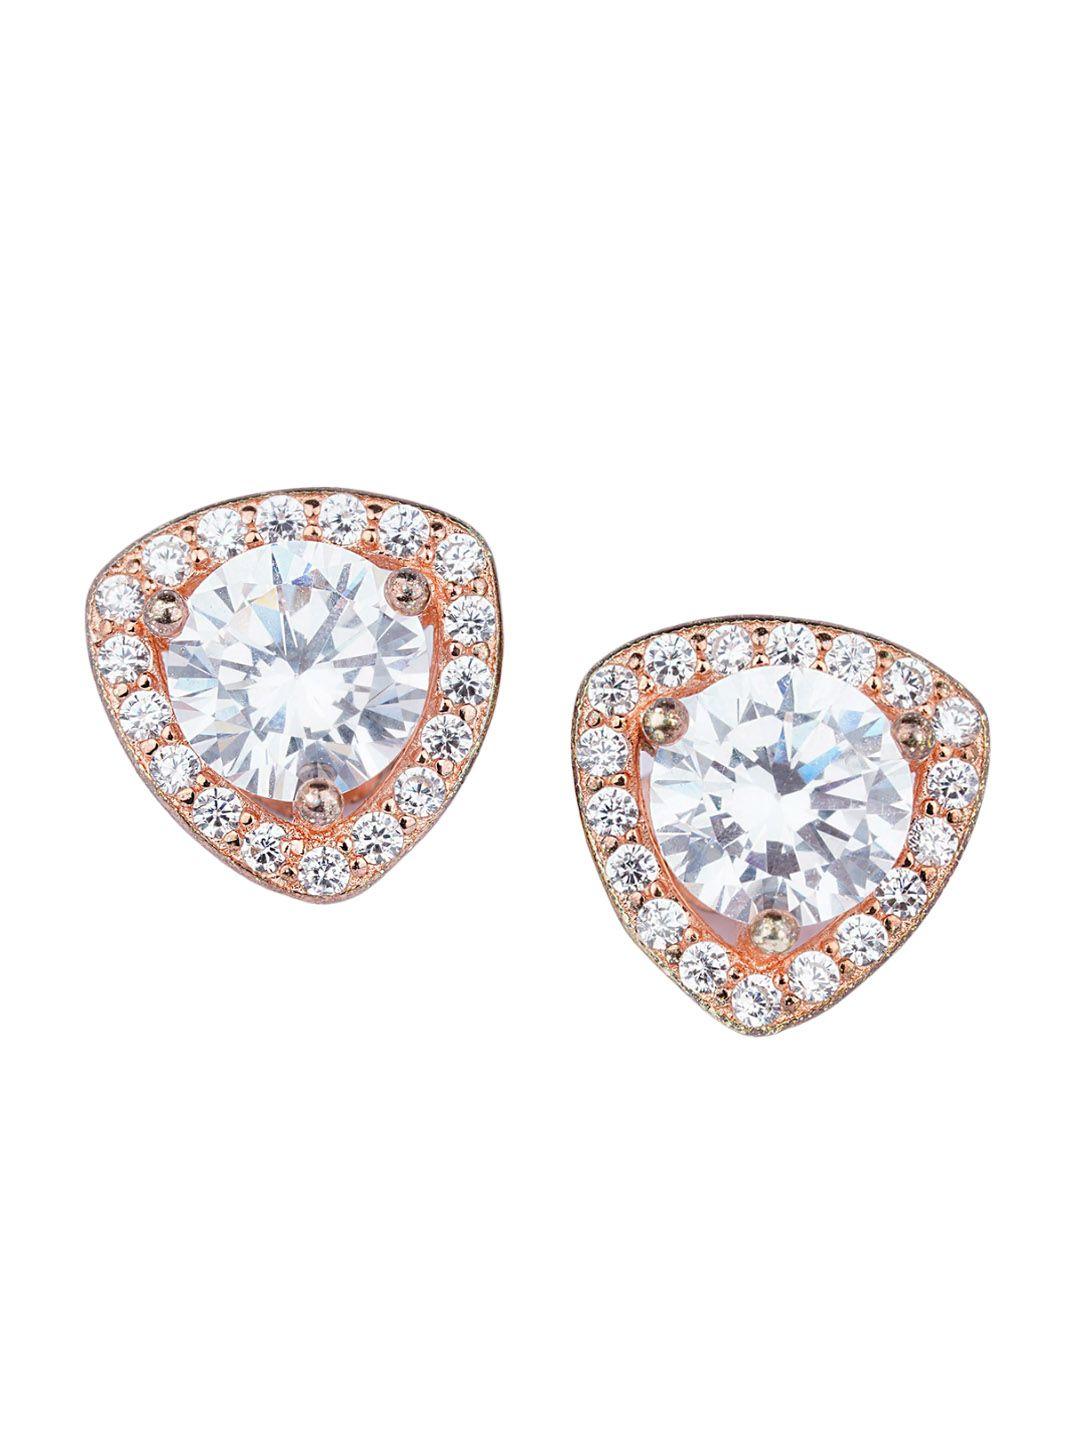 925 siller sterling silver rose gold-plated zircon studded contemporary studs earrings